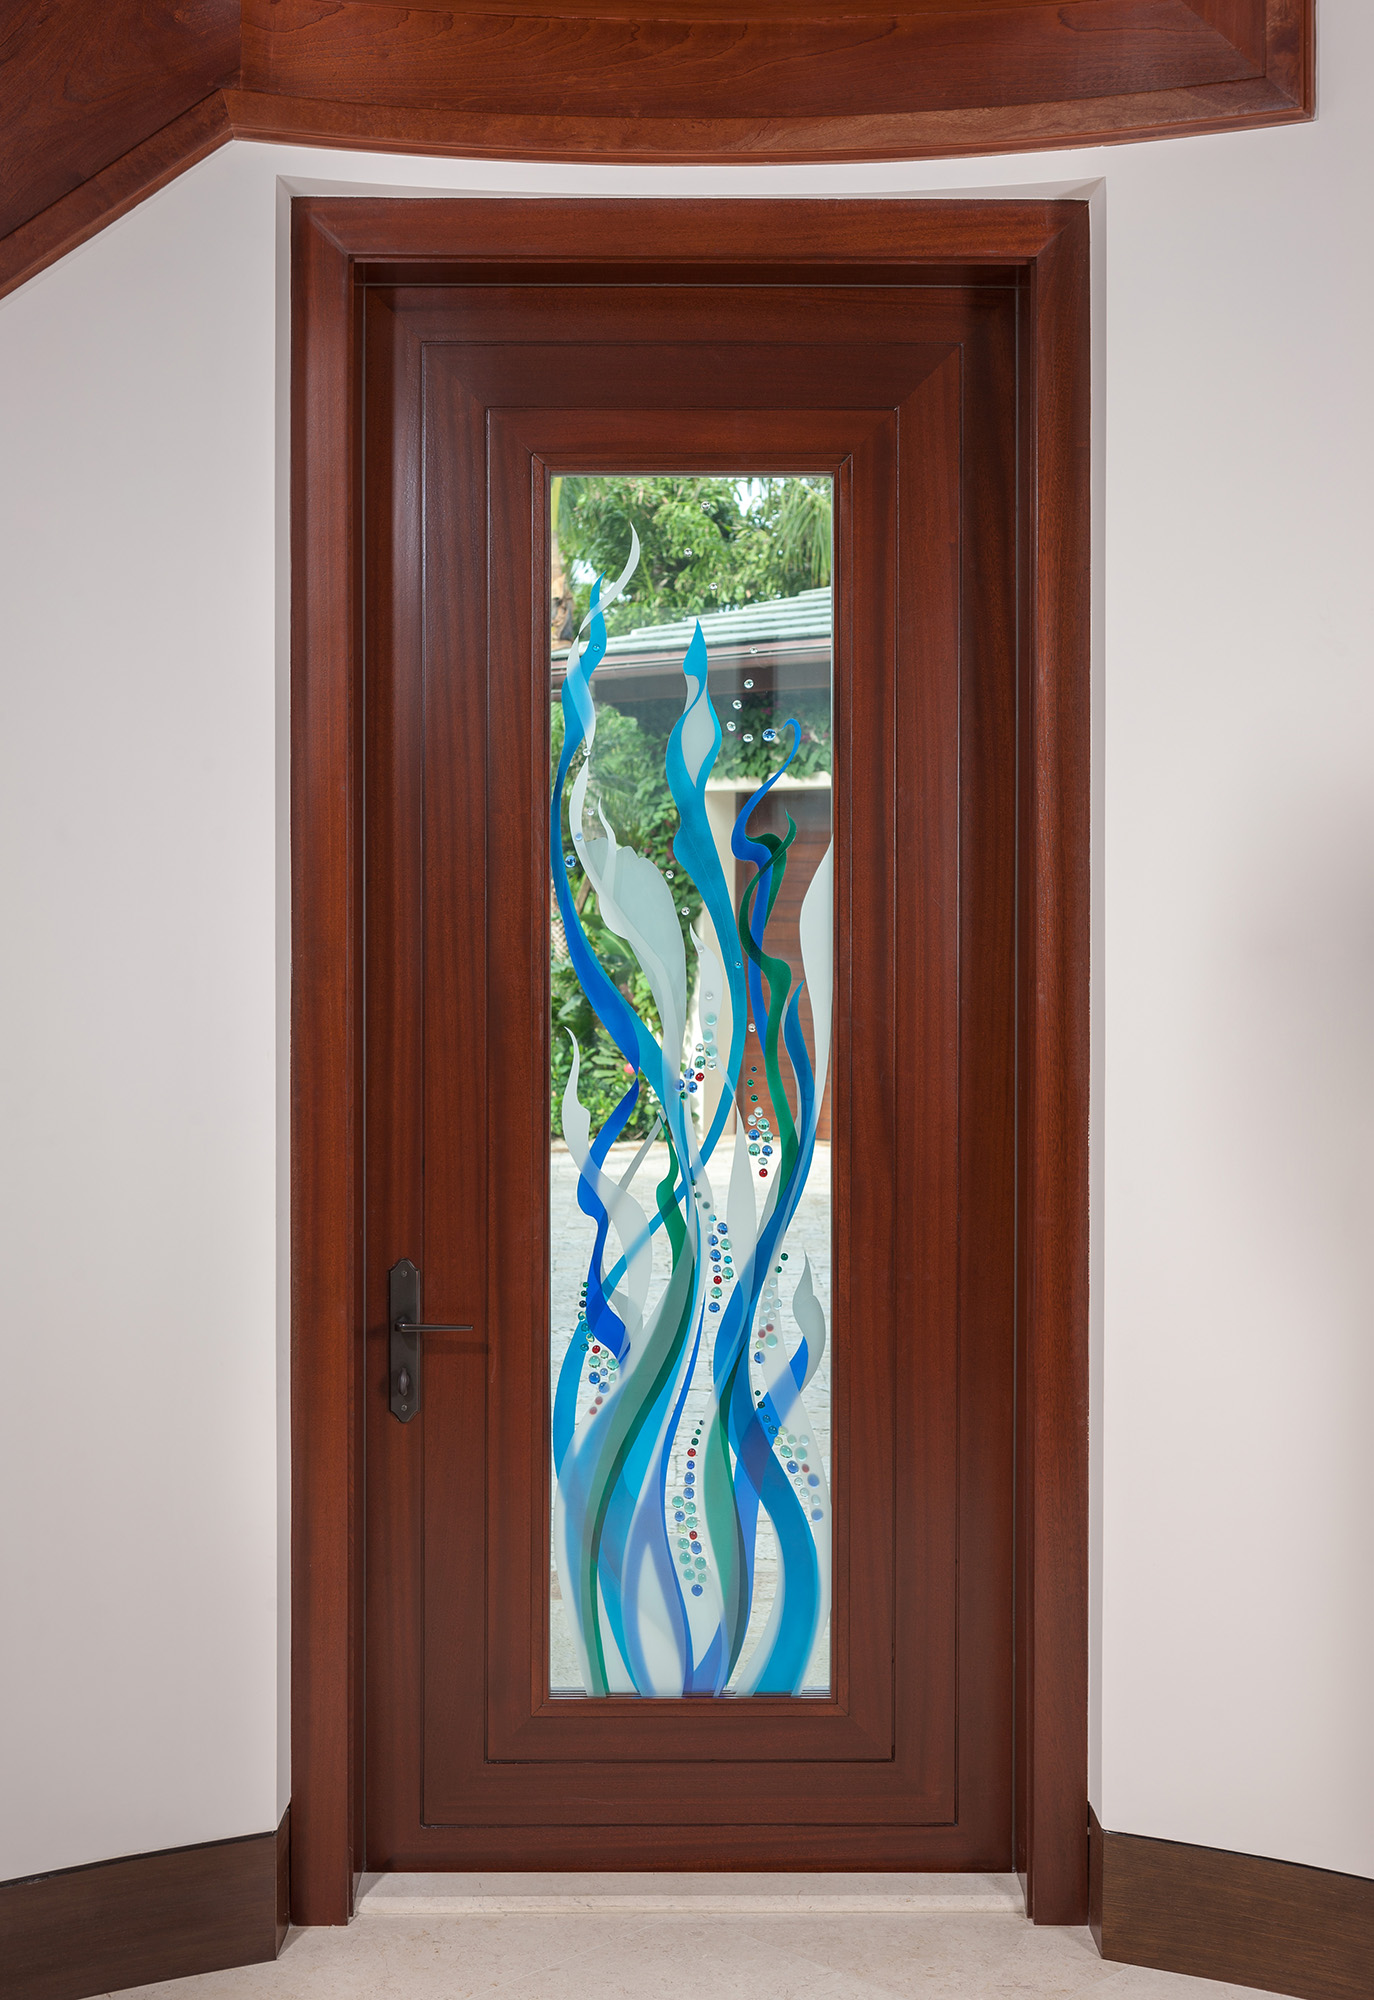 Doorway with a modern and contemporary style of white, blue, and green colored glass.